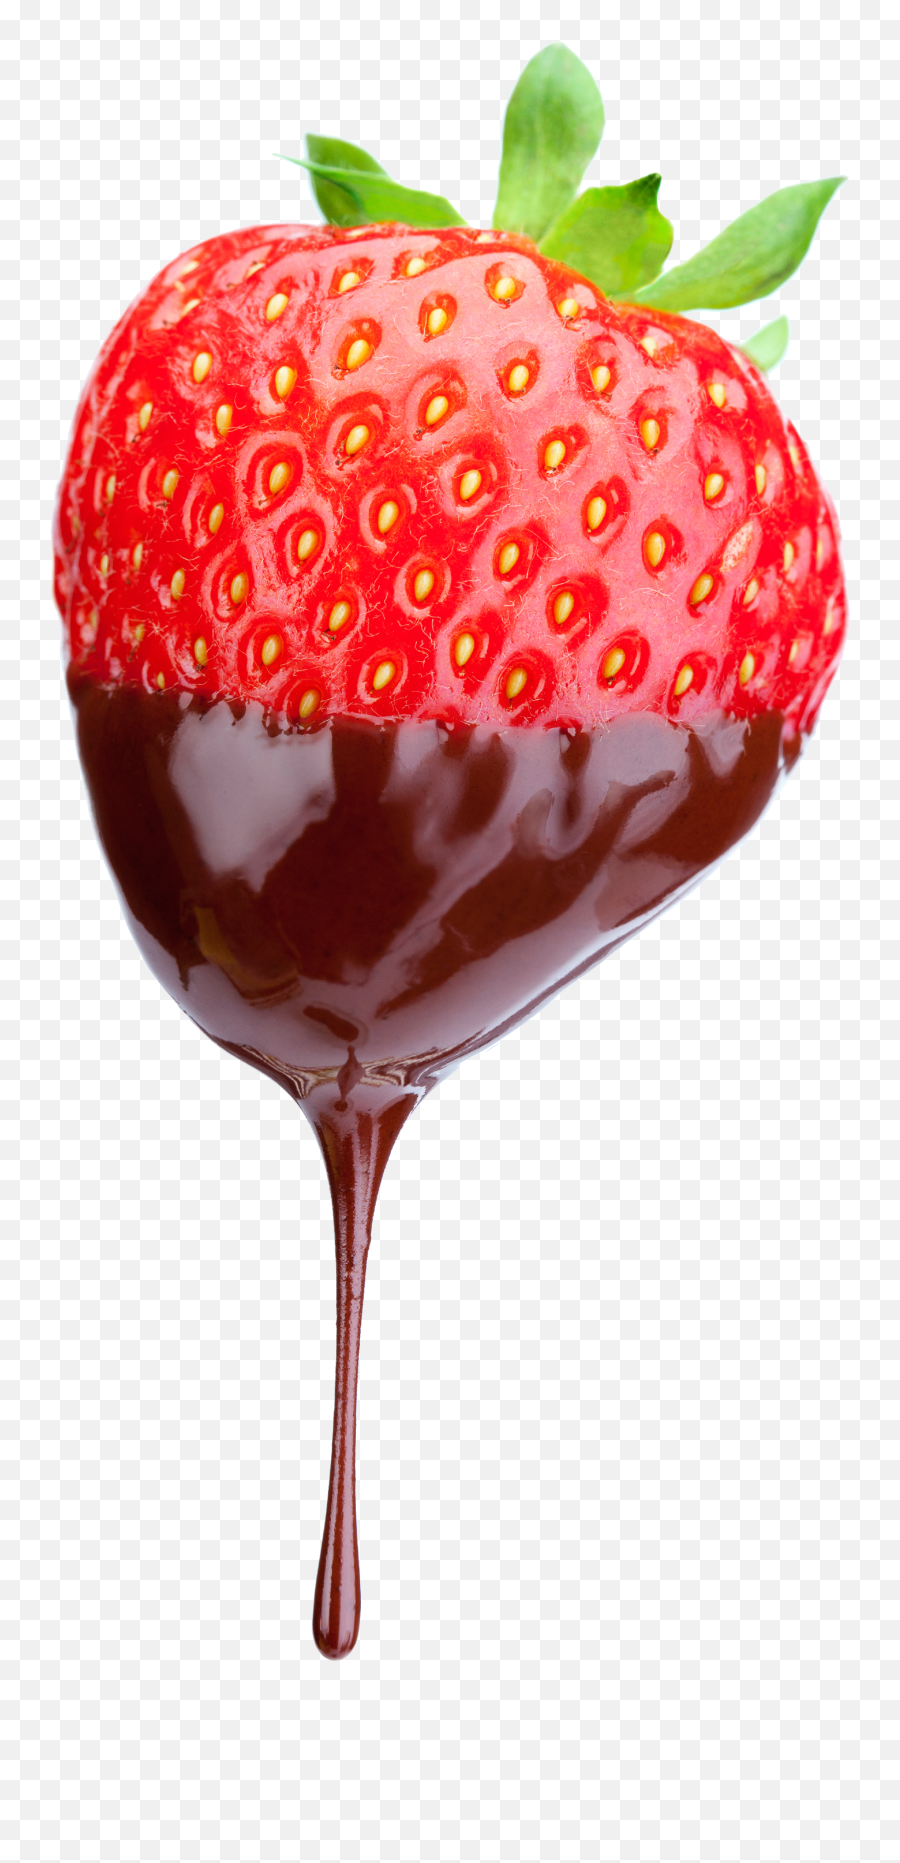 Strawberry Peoples Rx Austinu0027s Favorite Pharmacy - Strawberry With Dripping Chocolate Png,Strawberry Png